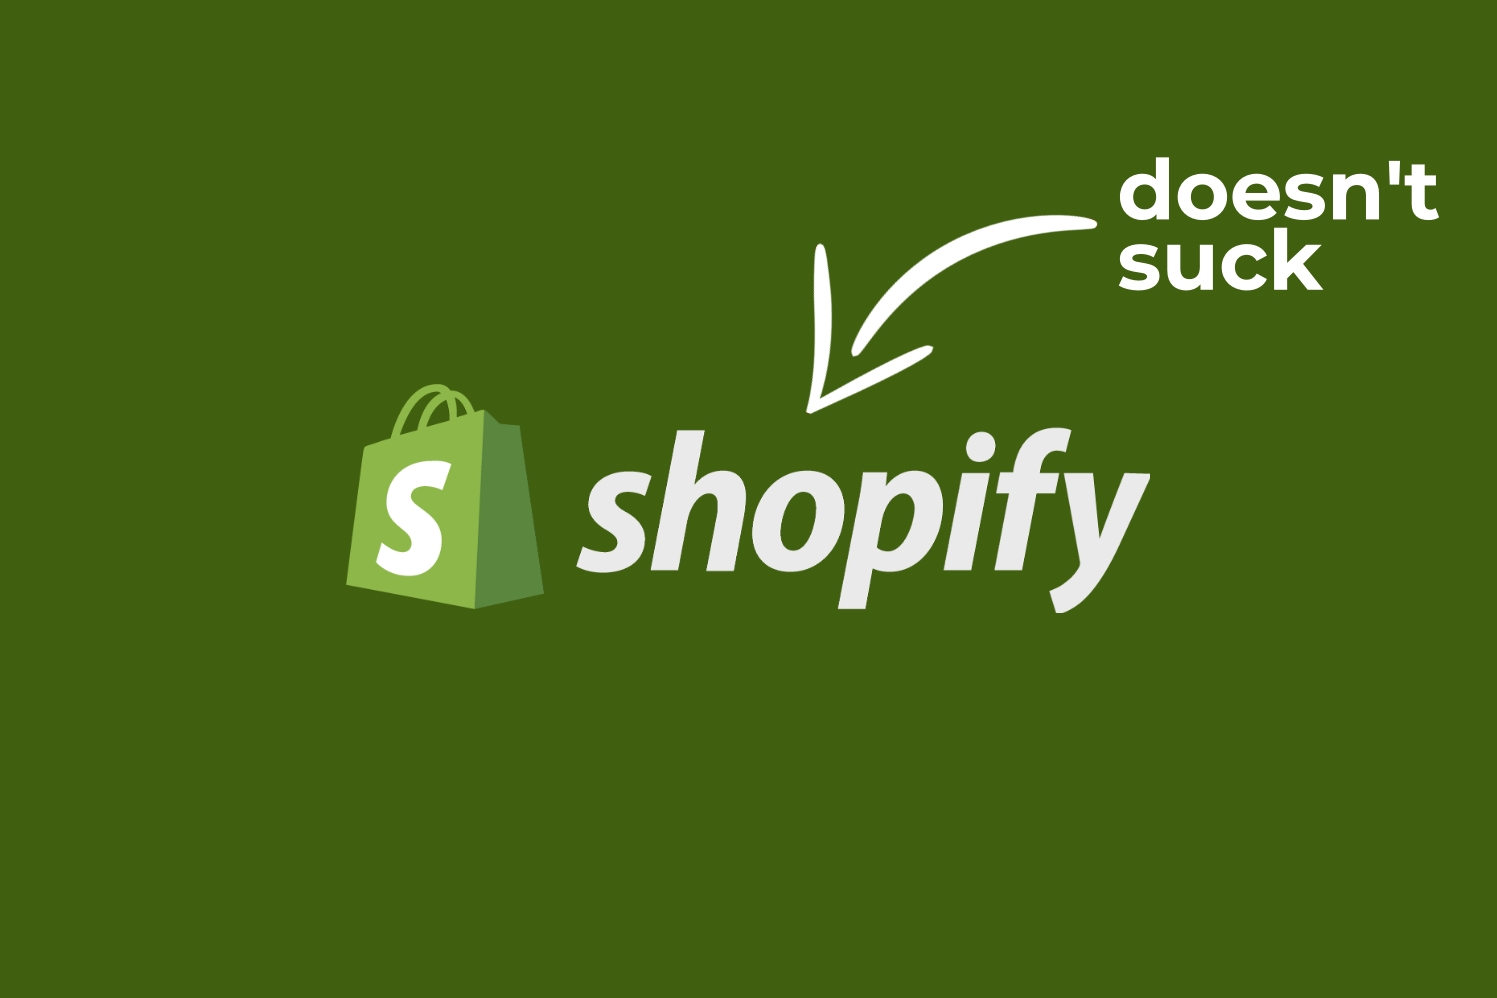 Shopify doesn't suck anymore - here's why we changed our minds